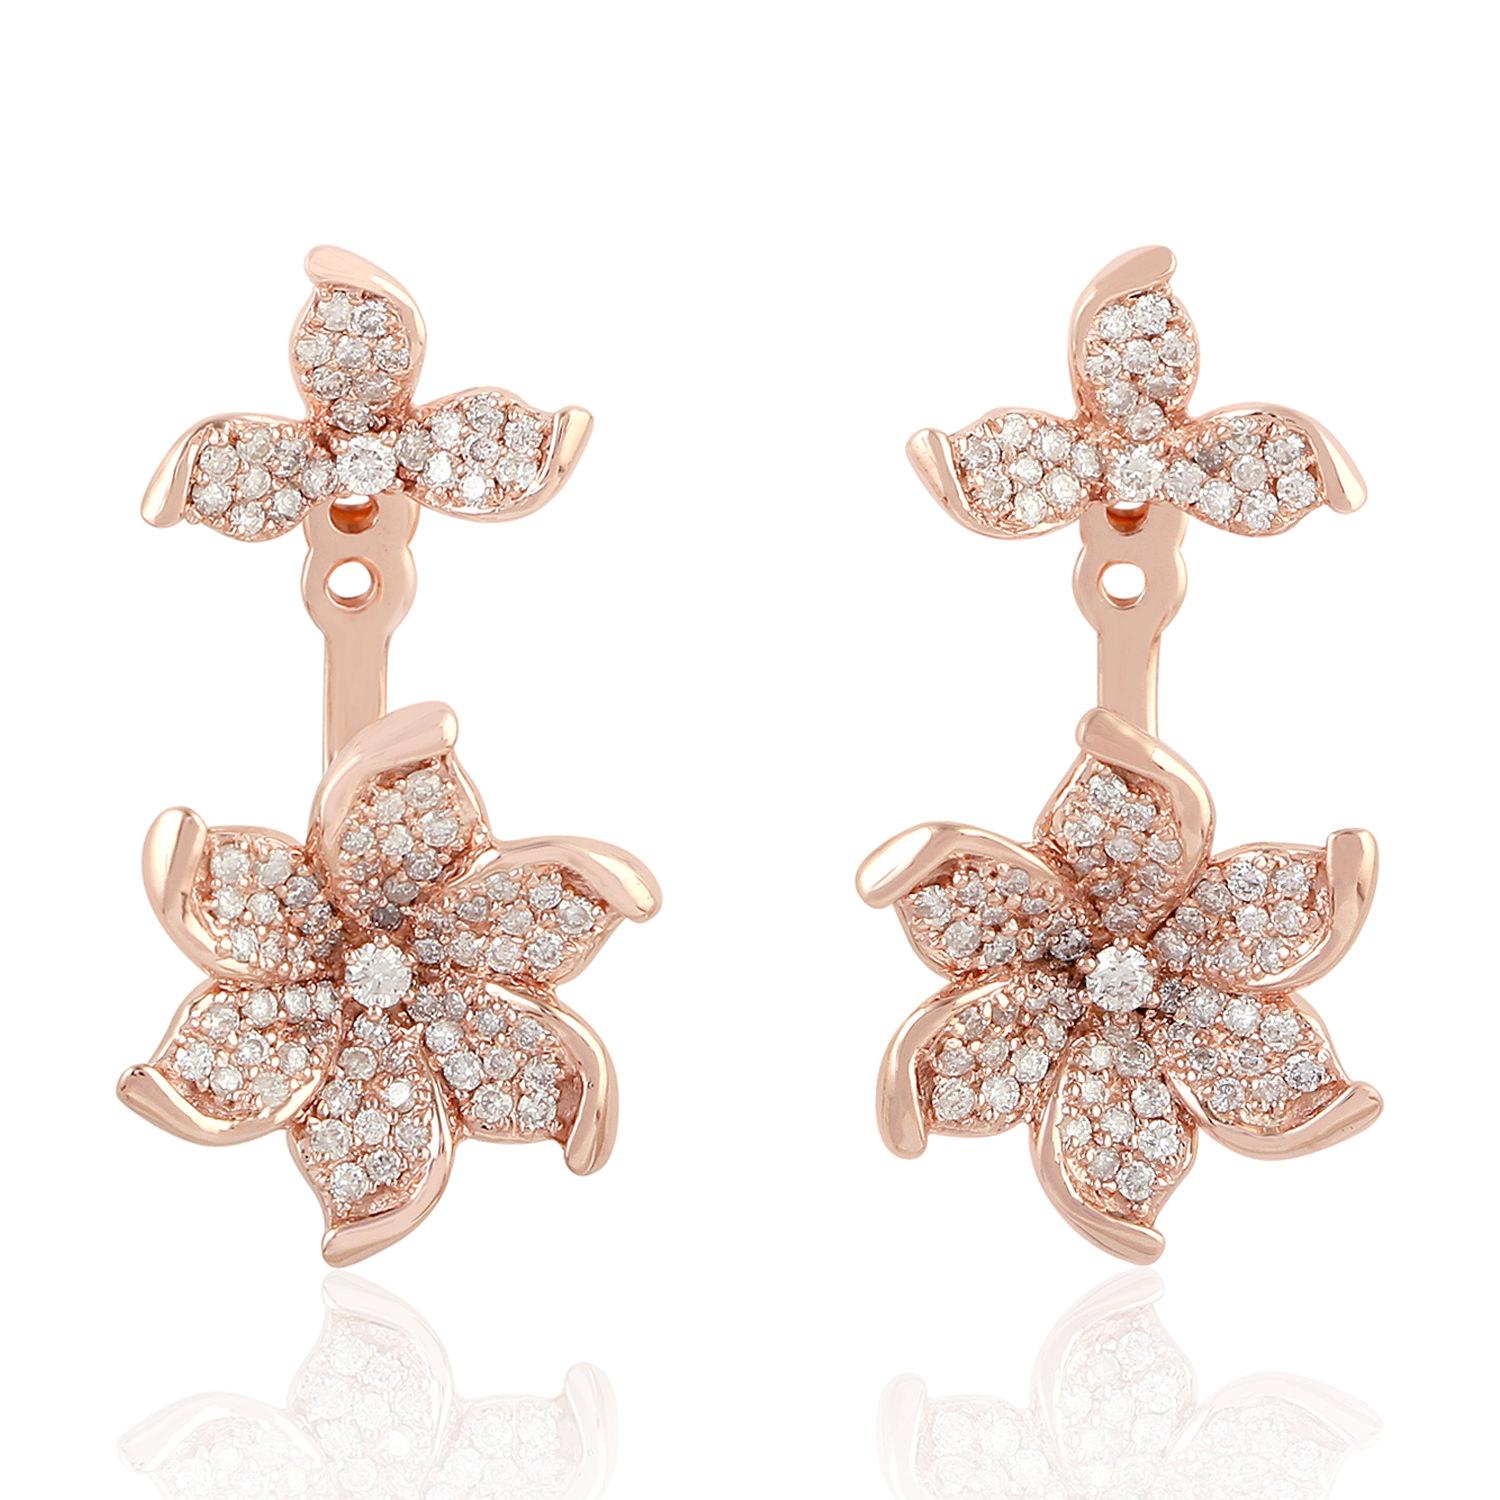 Mixed Cut Designer Flower Shaped Earrings with Pave Diamonds Made in 18k Rose Gold For Sale